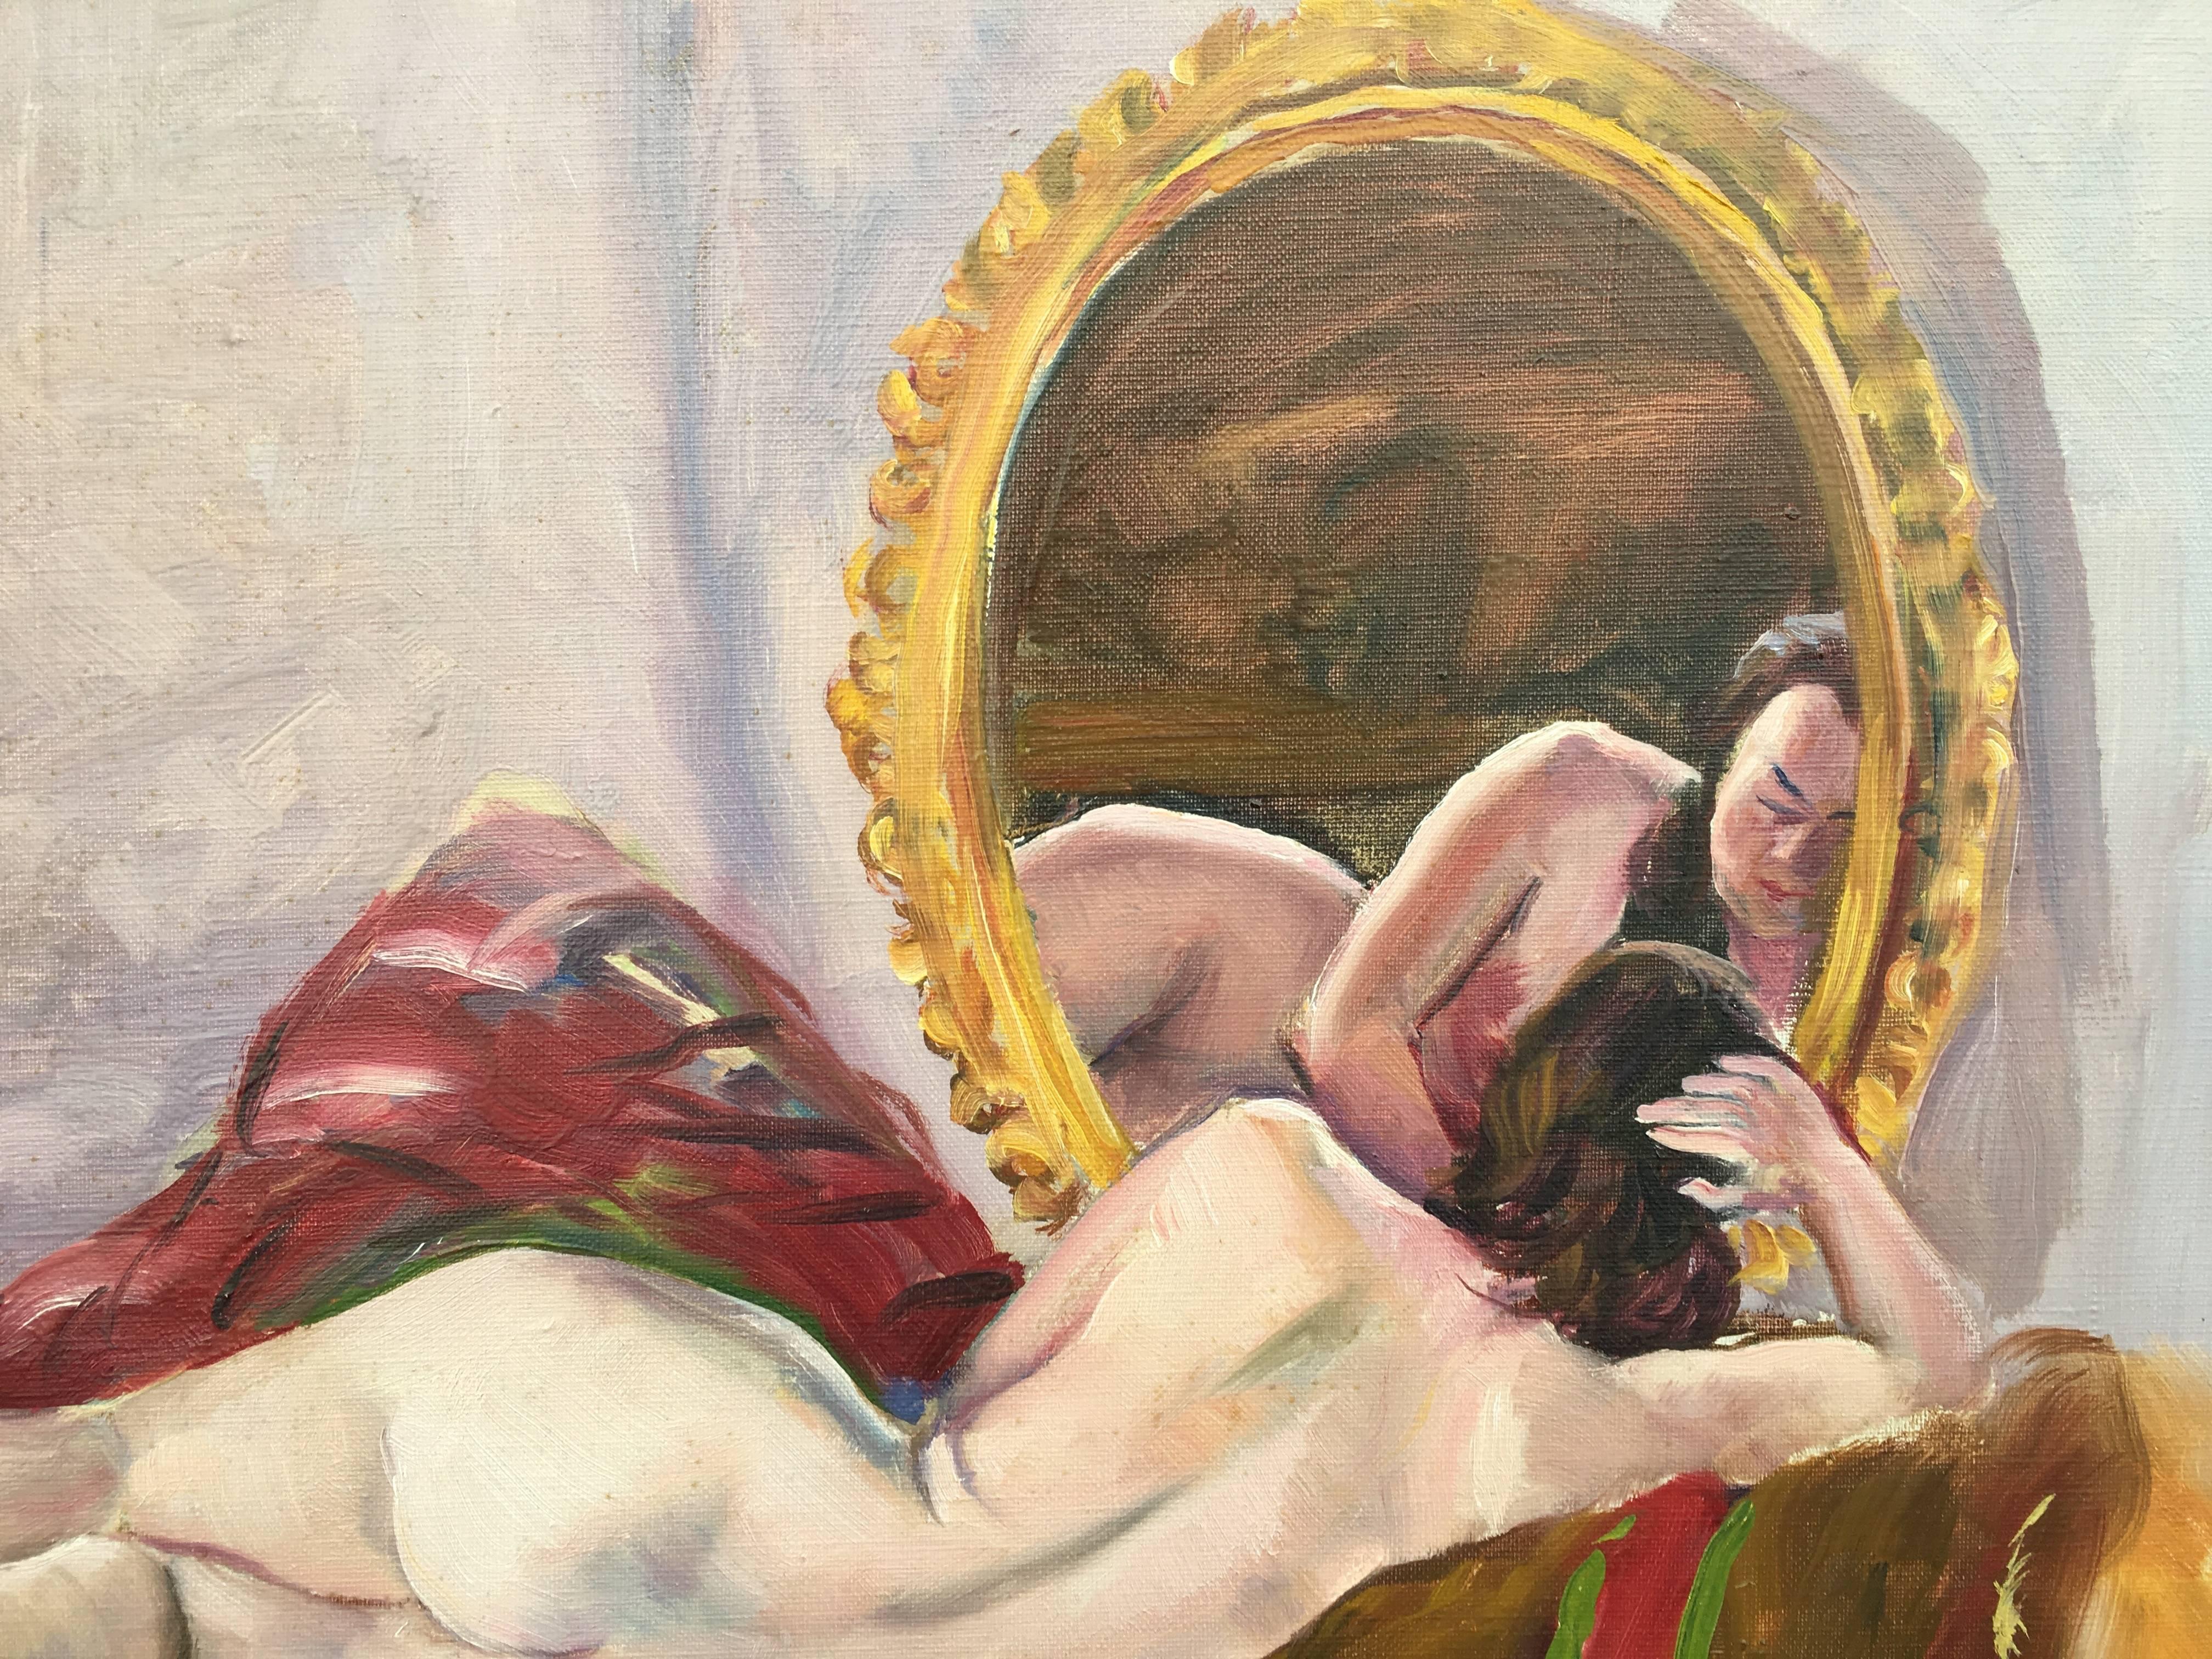 Reclining Nude Looking in the Mirror - Painting by Adrien Dupagne